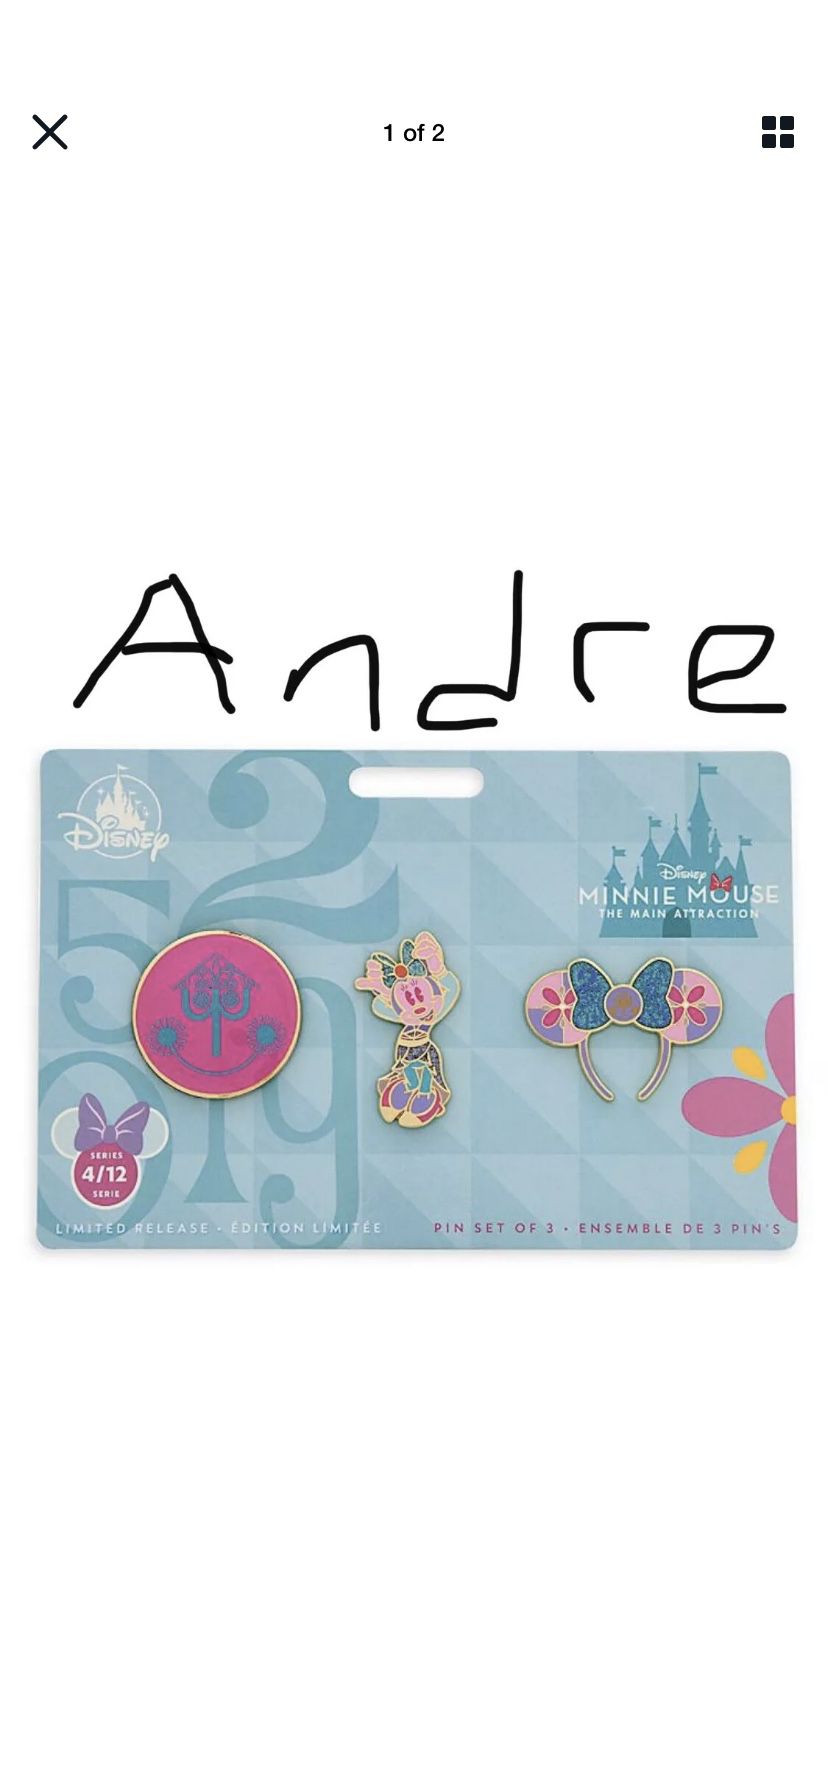 Disney Minnie Mouse Pins mIn attraction 2020 It's a Small World CONFIRMED ORDER